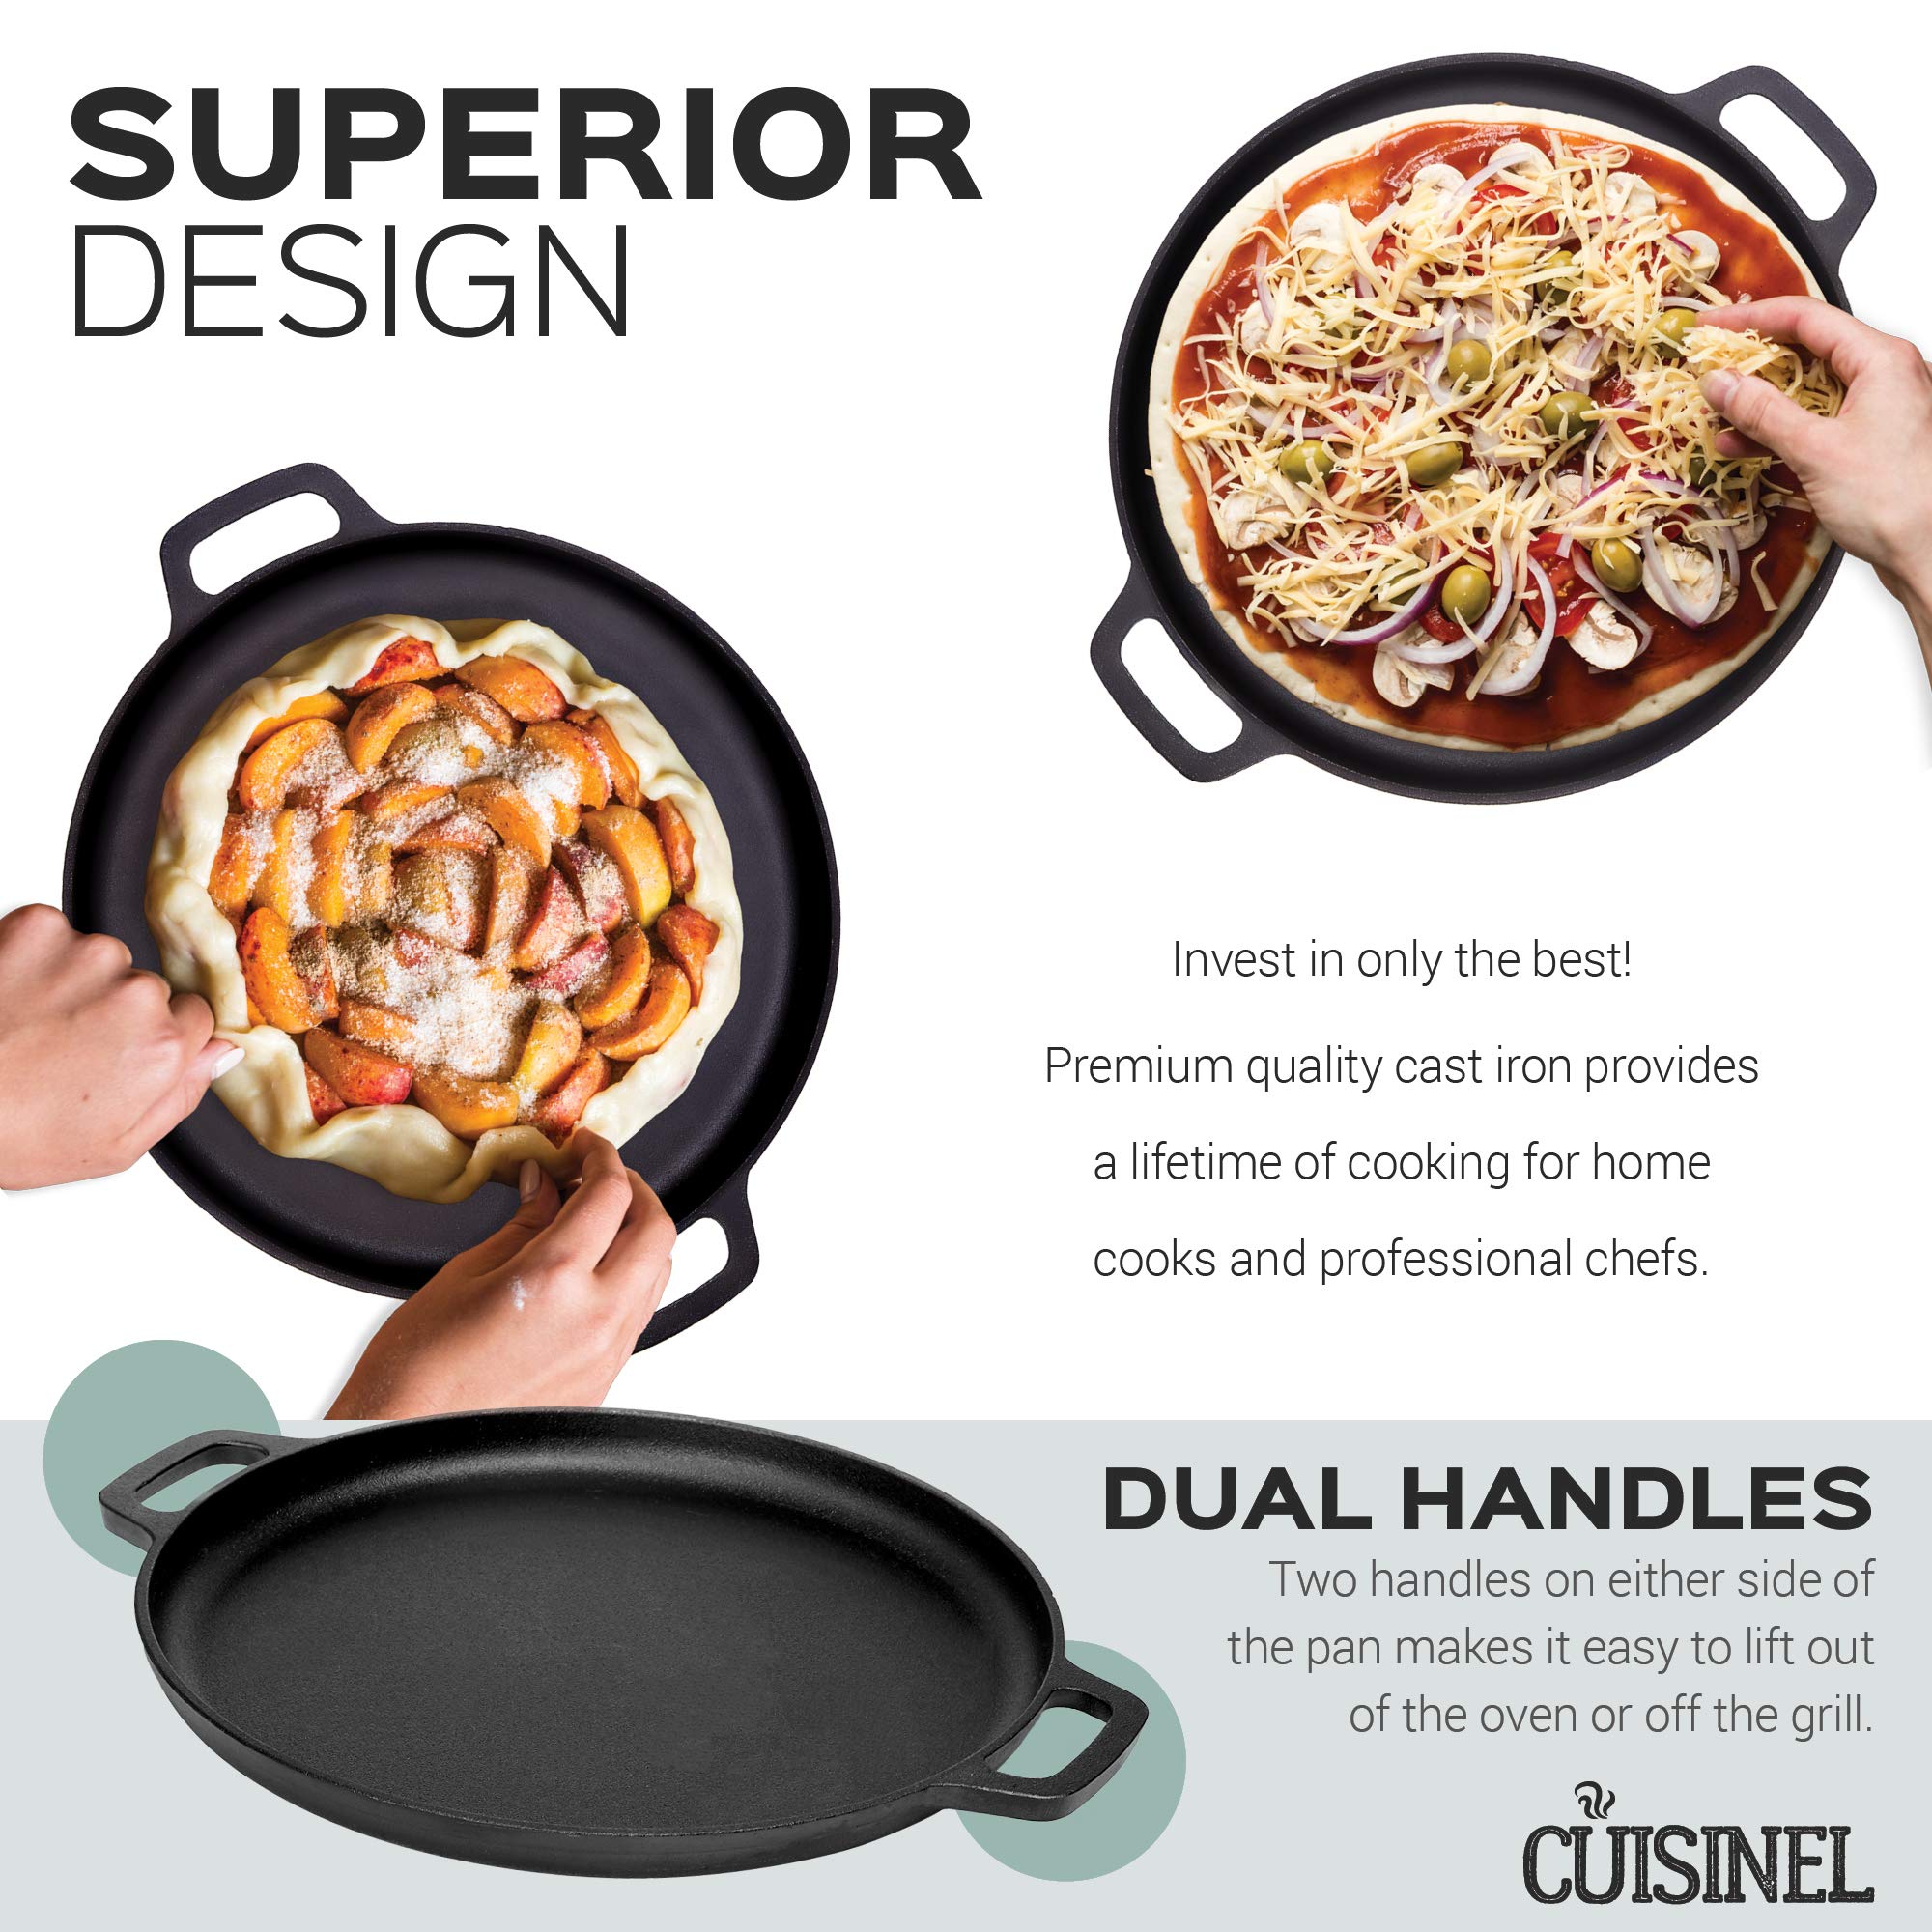 Cuisinel Cast Iron Pizza Pan/Round Griddle - 13.5" Flat Skillet - for Crepes and Frozen Pizza - Pre-Seasoned Comal for Tortillas - Dosa Tawa Roti - Works for Baking, Stove, Oven, Grill, BBQ, Campfire  - Like New